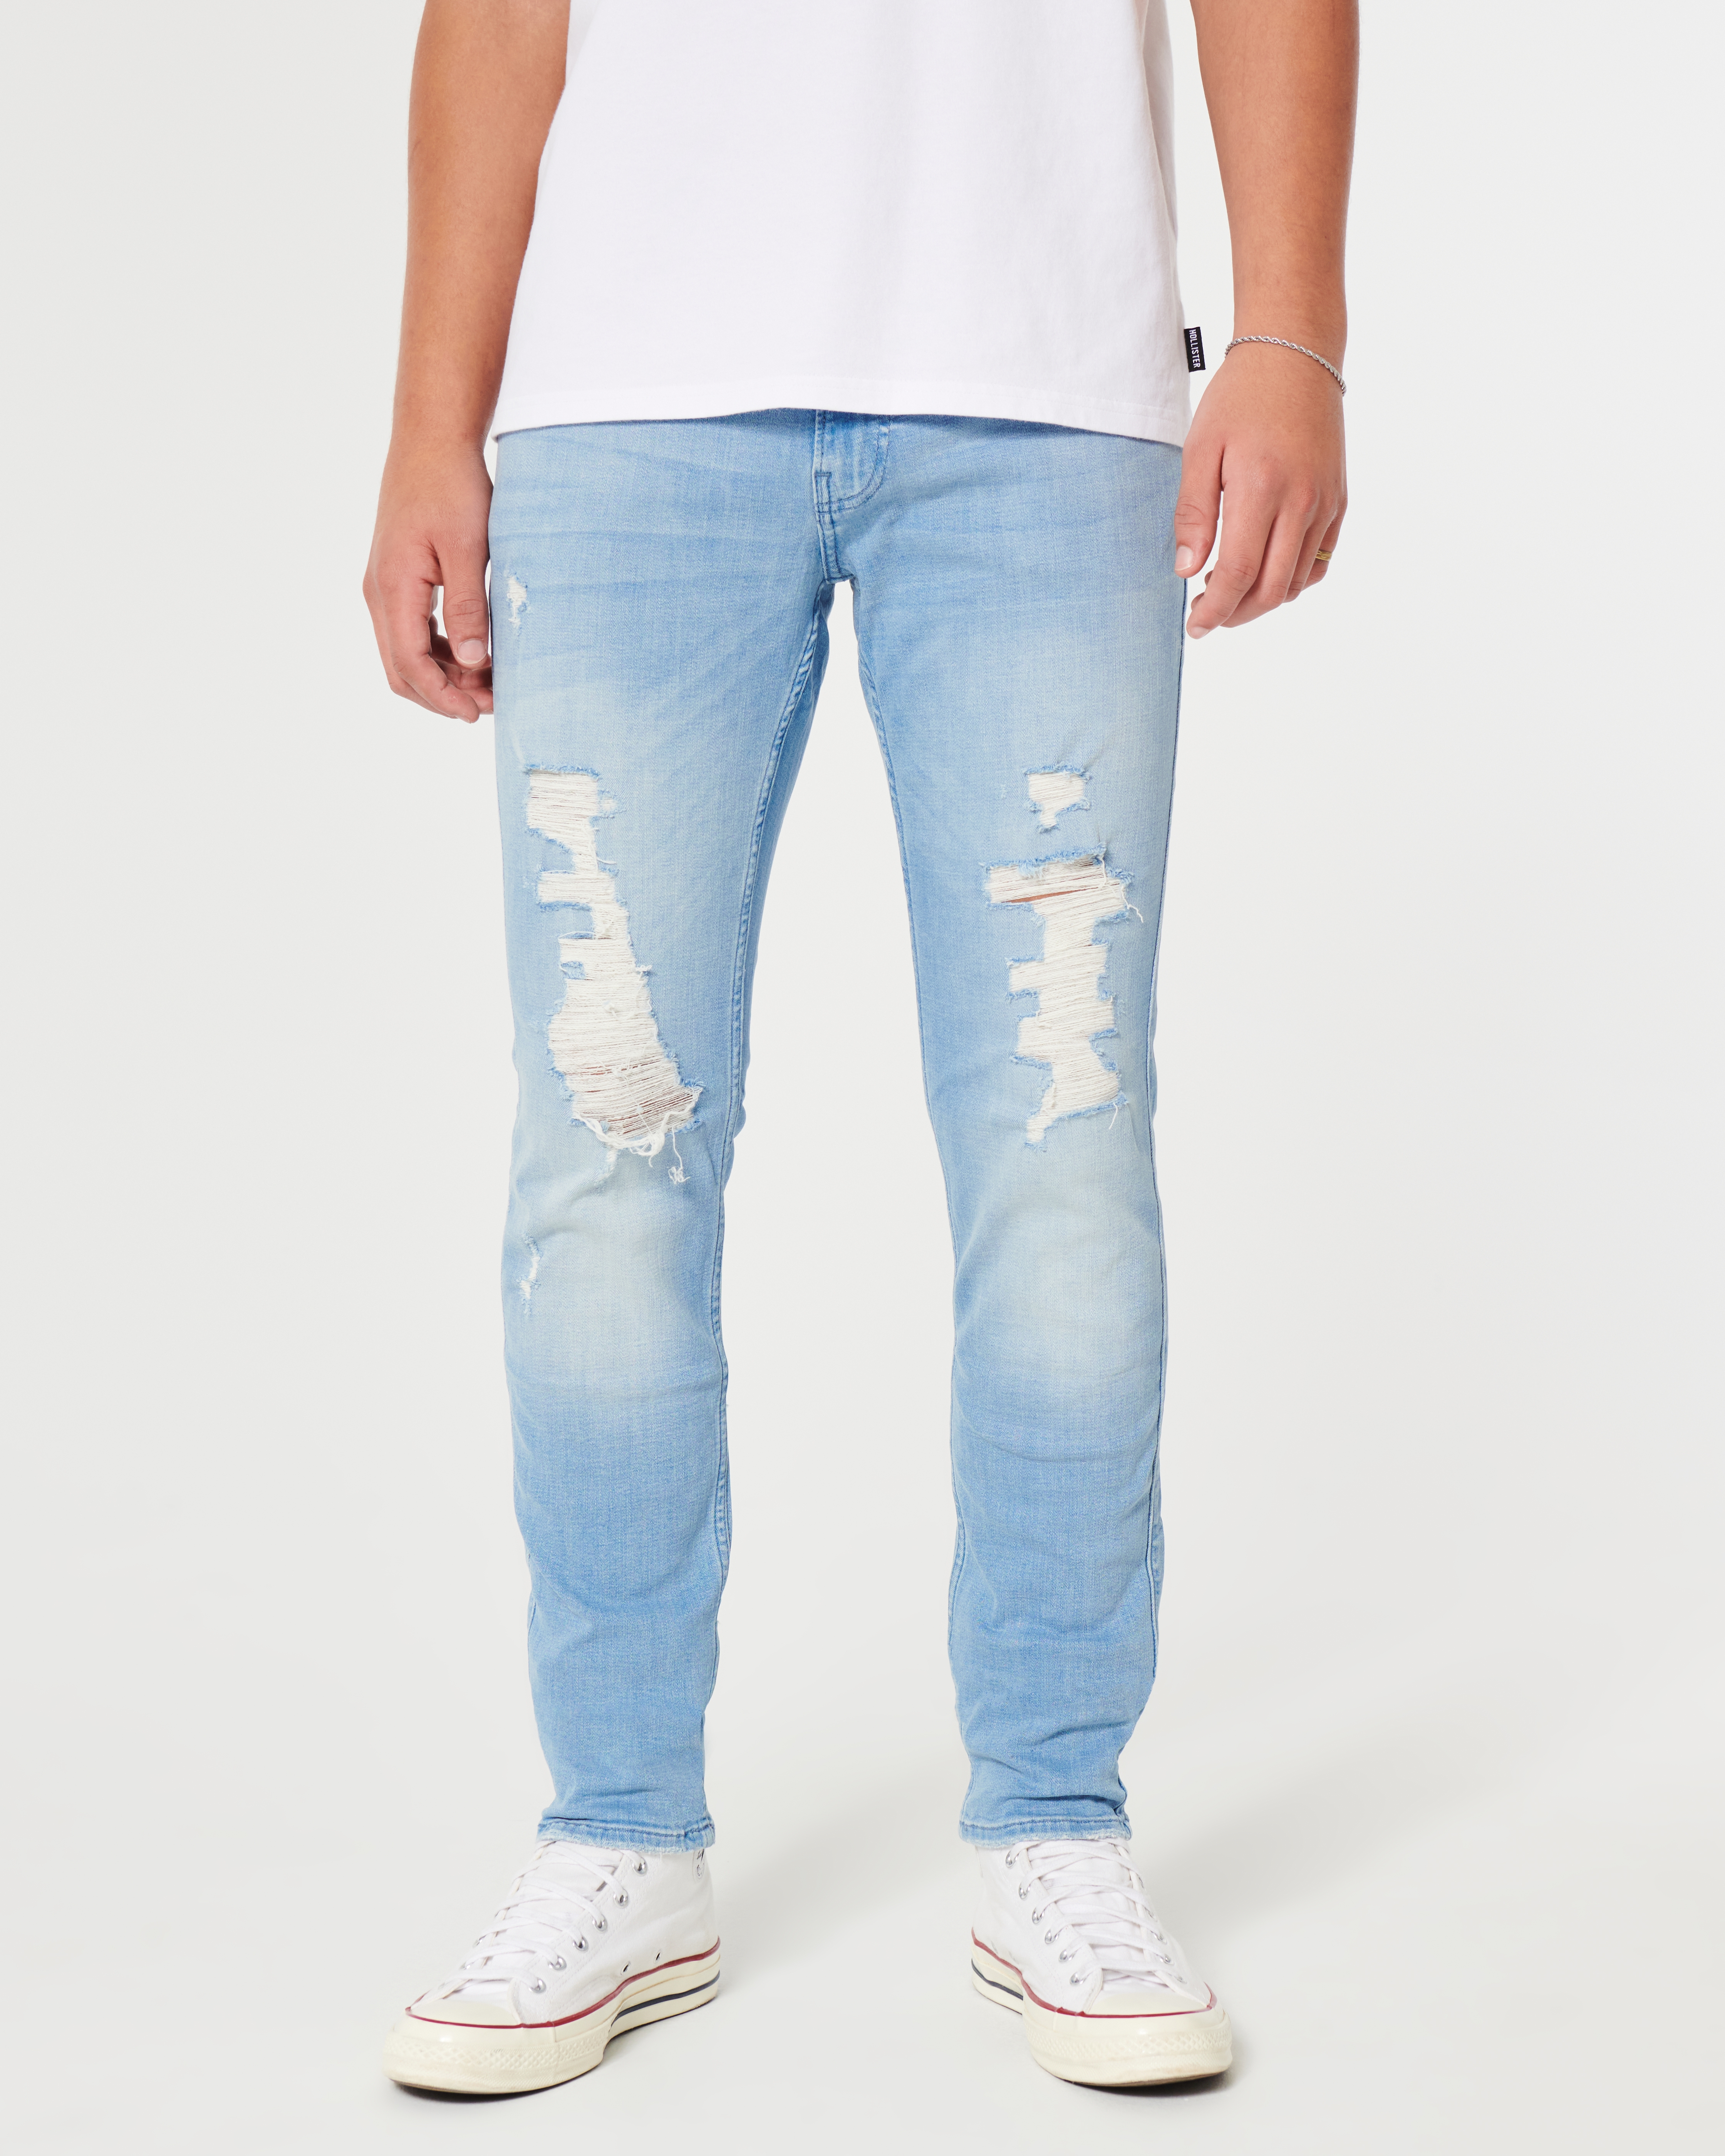 Ripped Light Wash Skinny Jeans